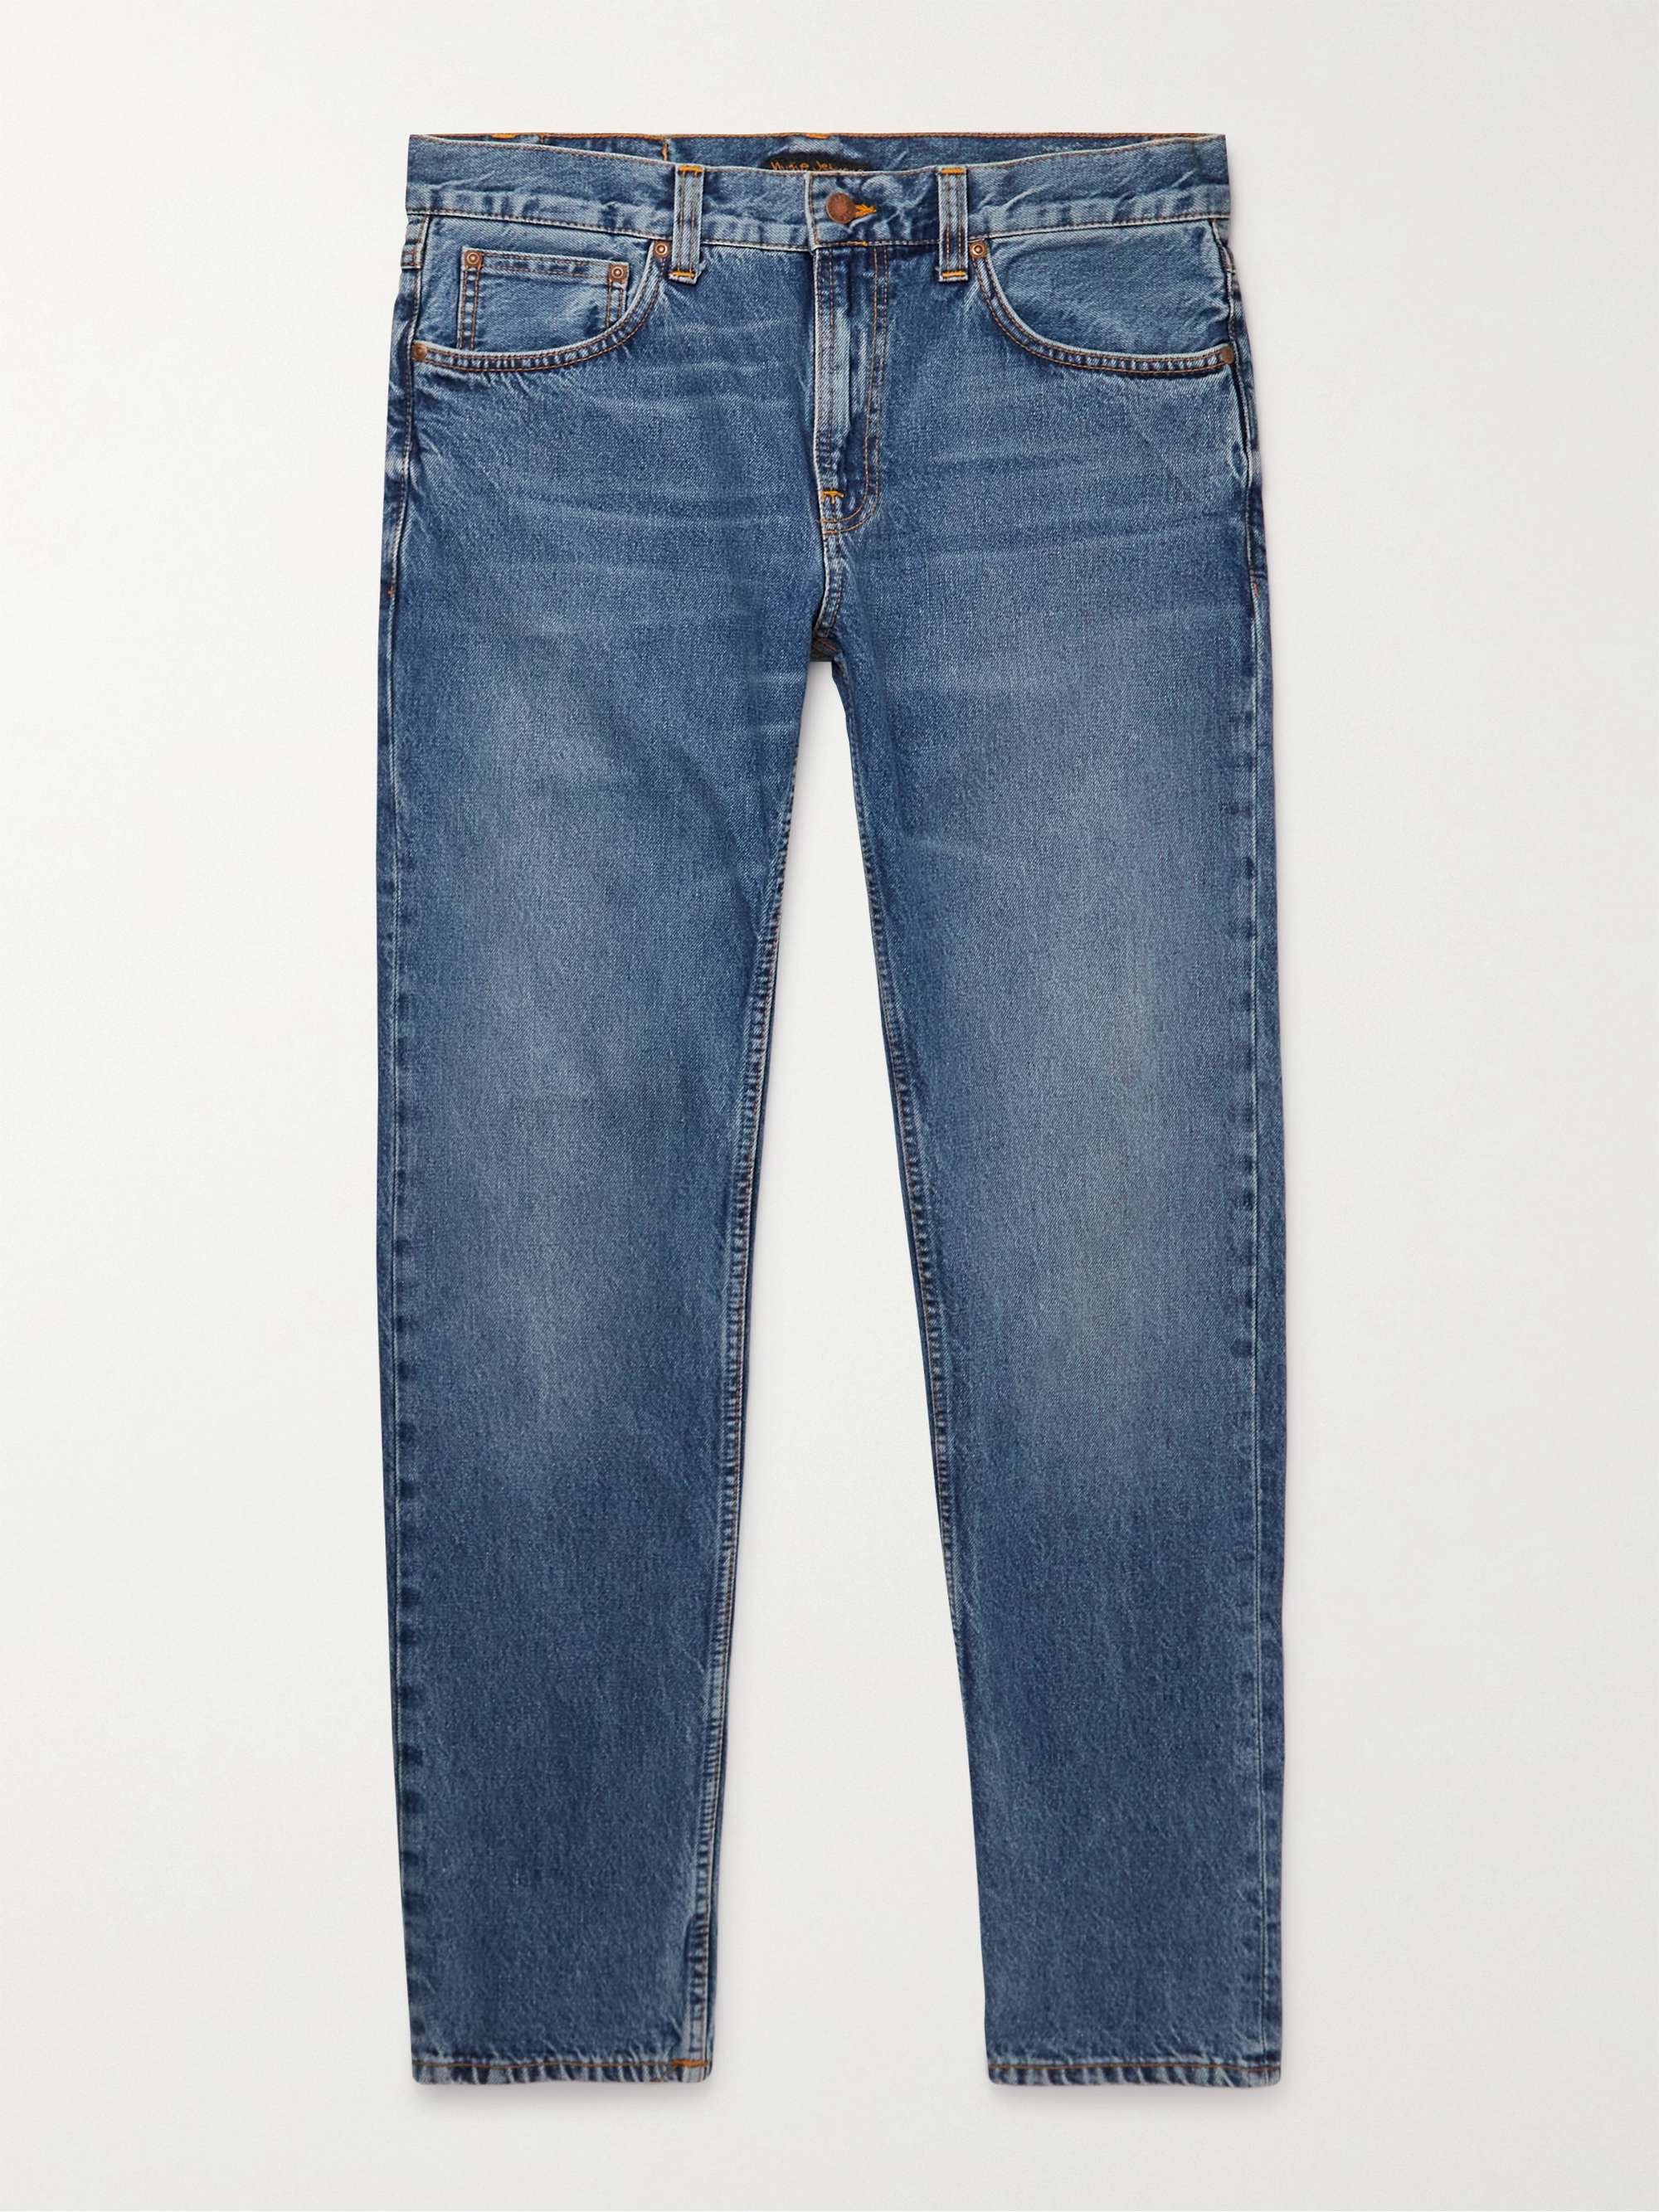 NUDIE JEANS Gritty Jackson Jeans